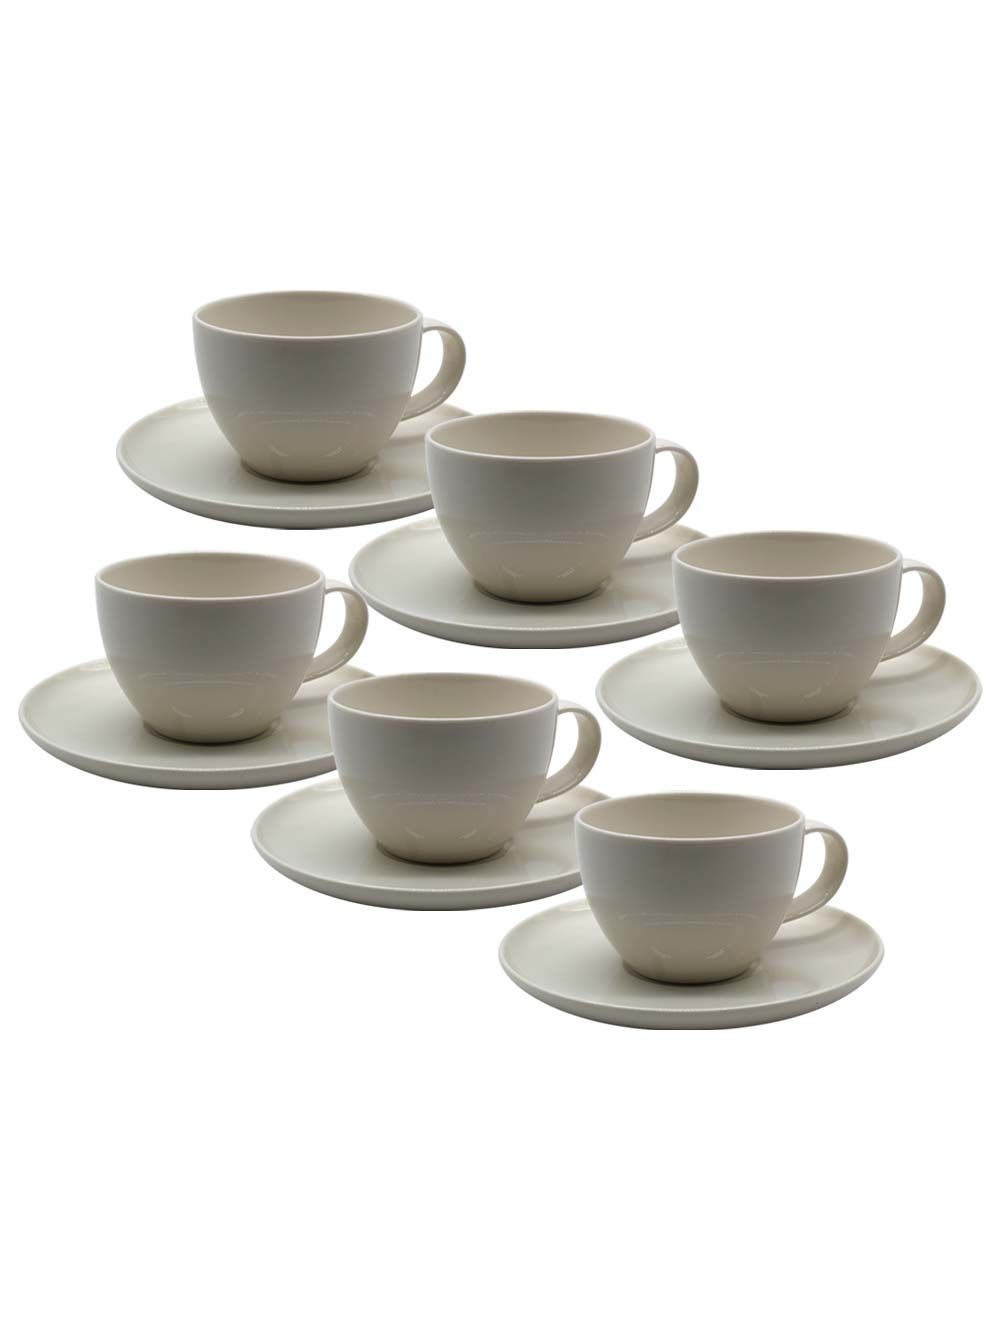 Qualitier Fine Plus Set of 12 Cups and Saucers